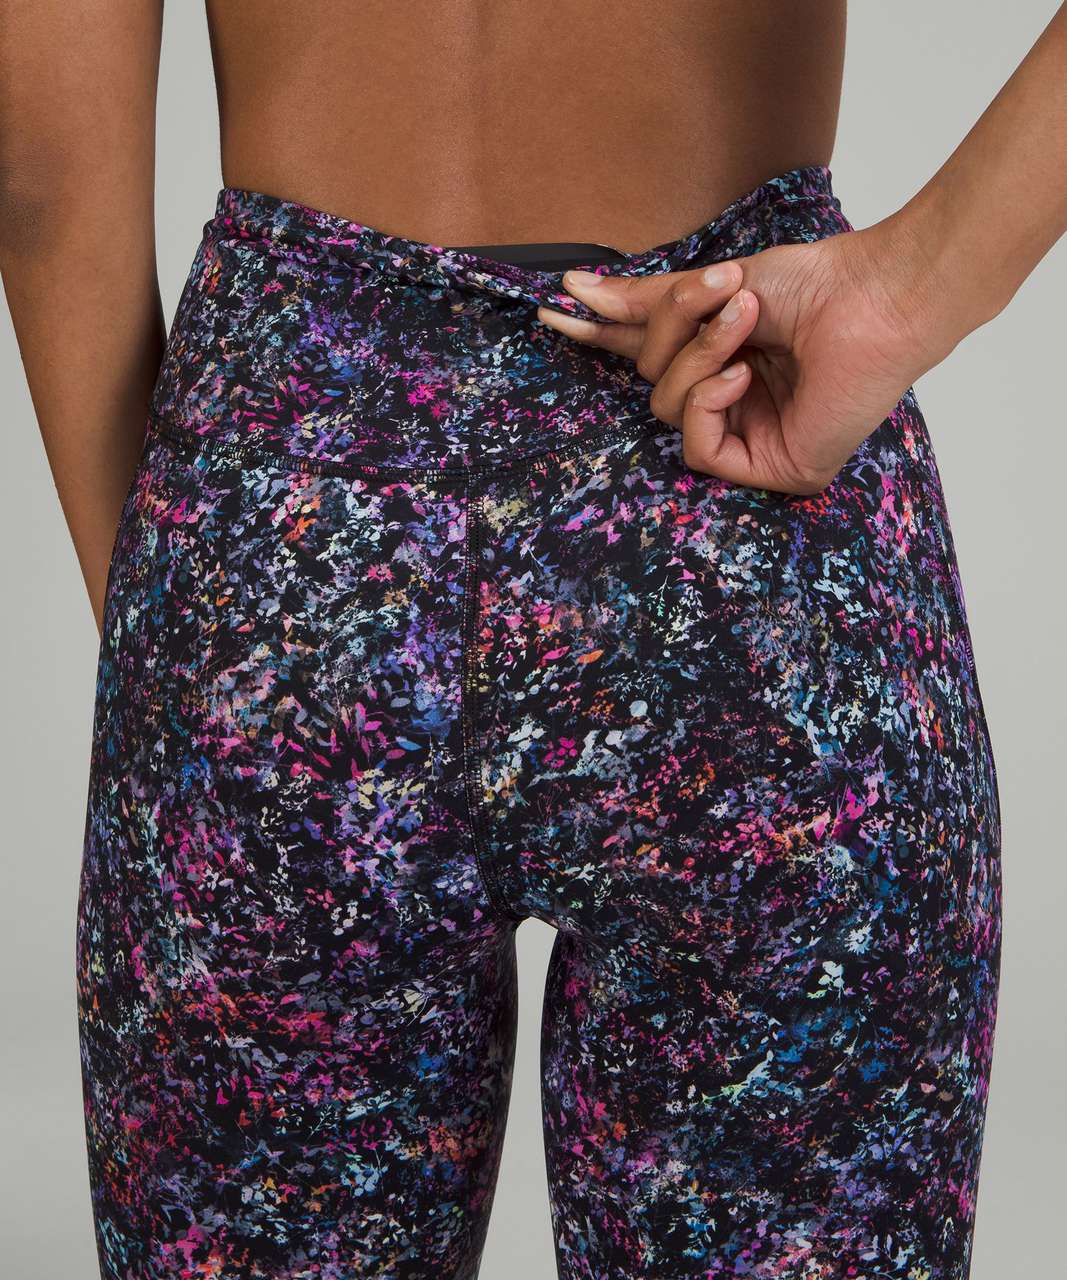 Lululemon Base Pace High-Rise Running Tight 28 - Floral Spray